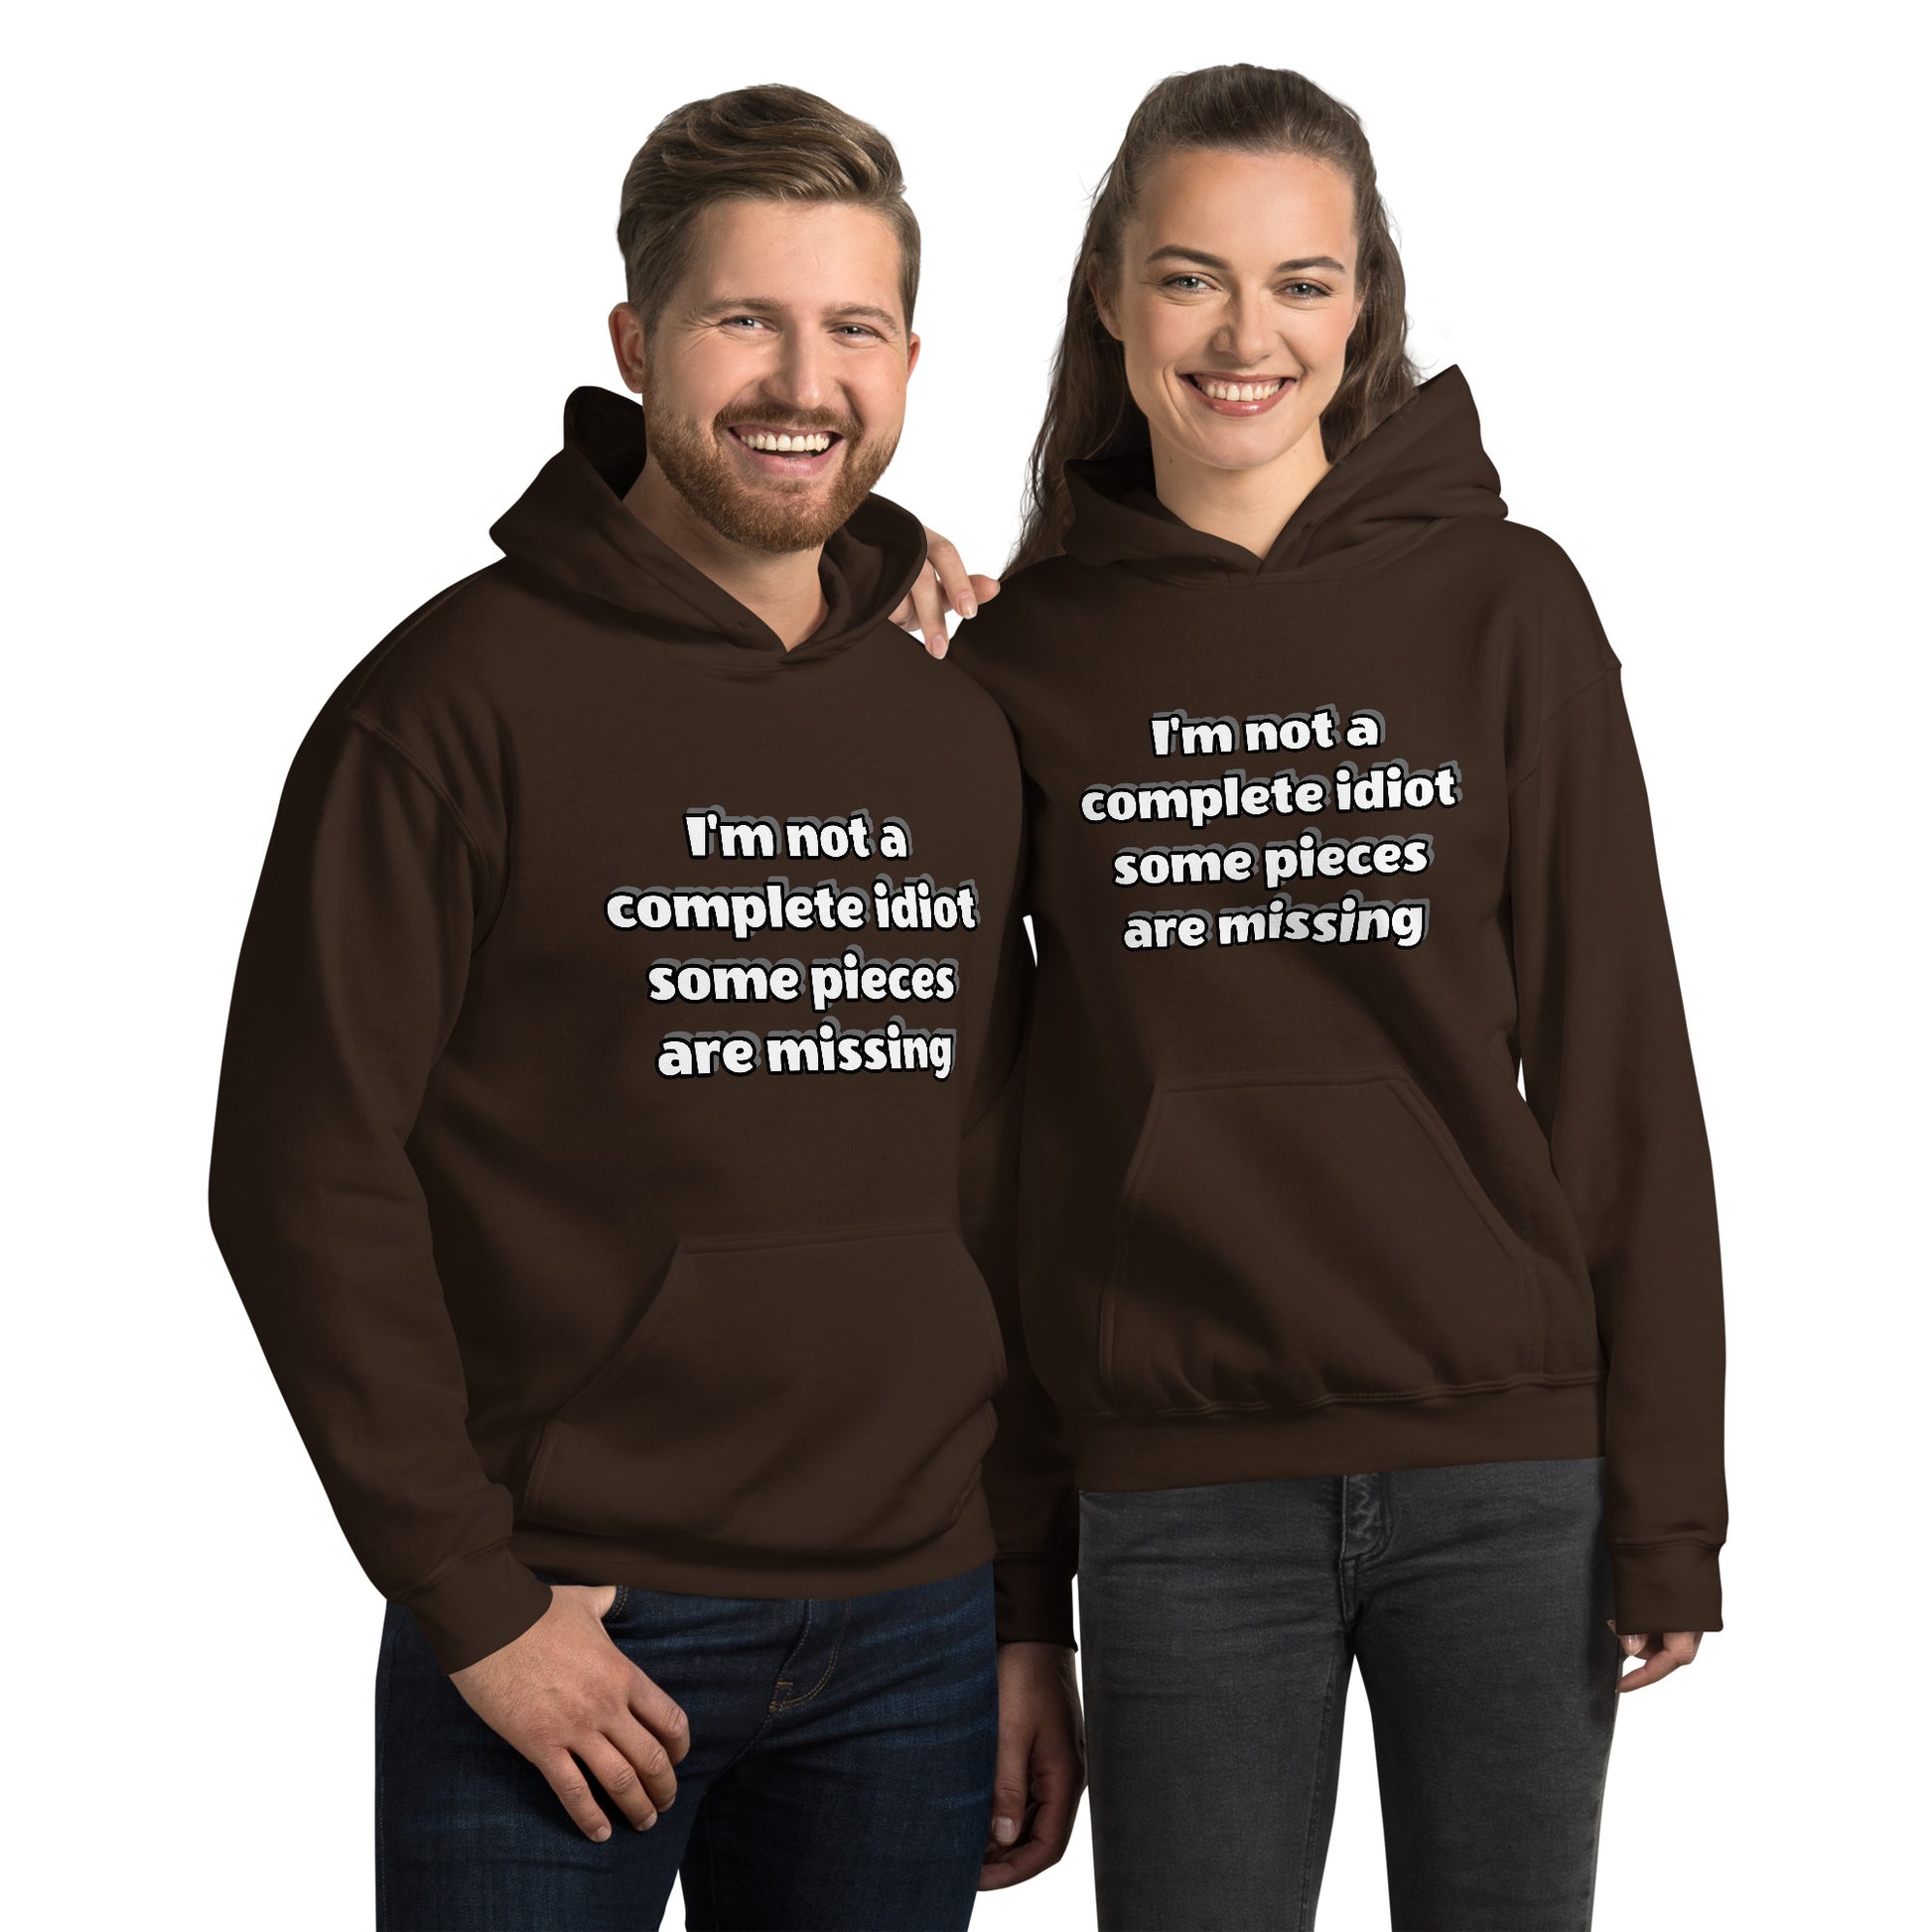 Men and women with chocolate brown hoodie with text “I’m not a complete idiot, some pieces are missing”